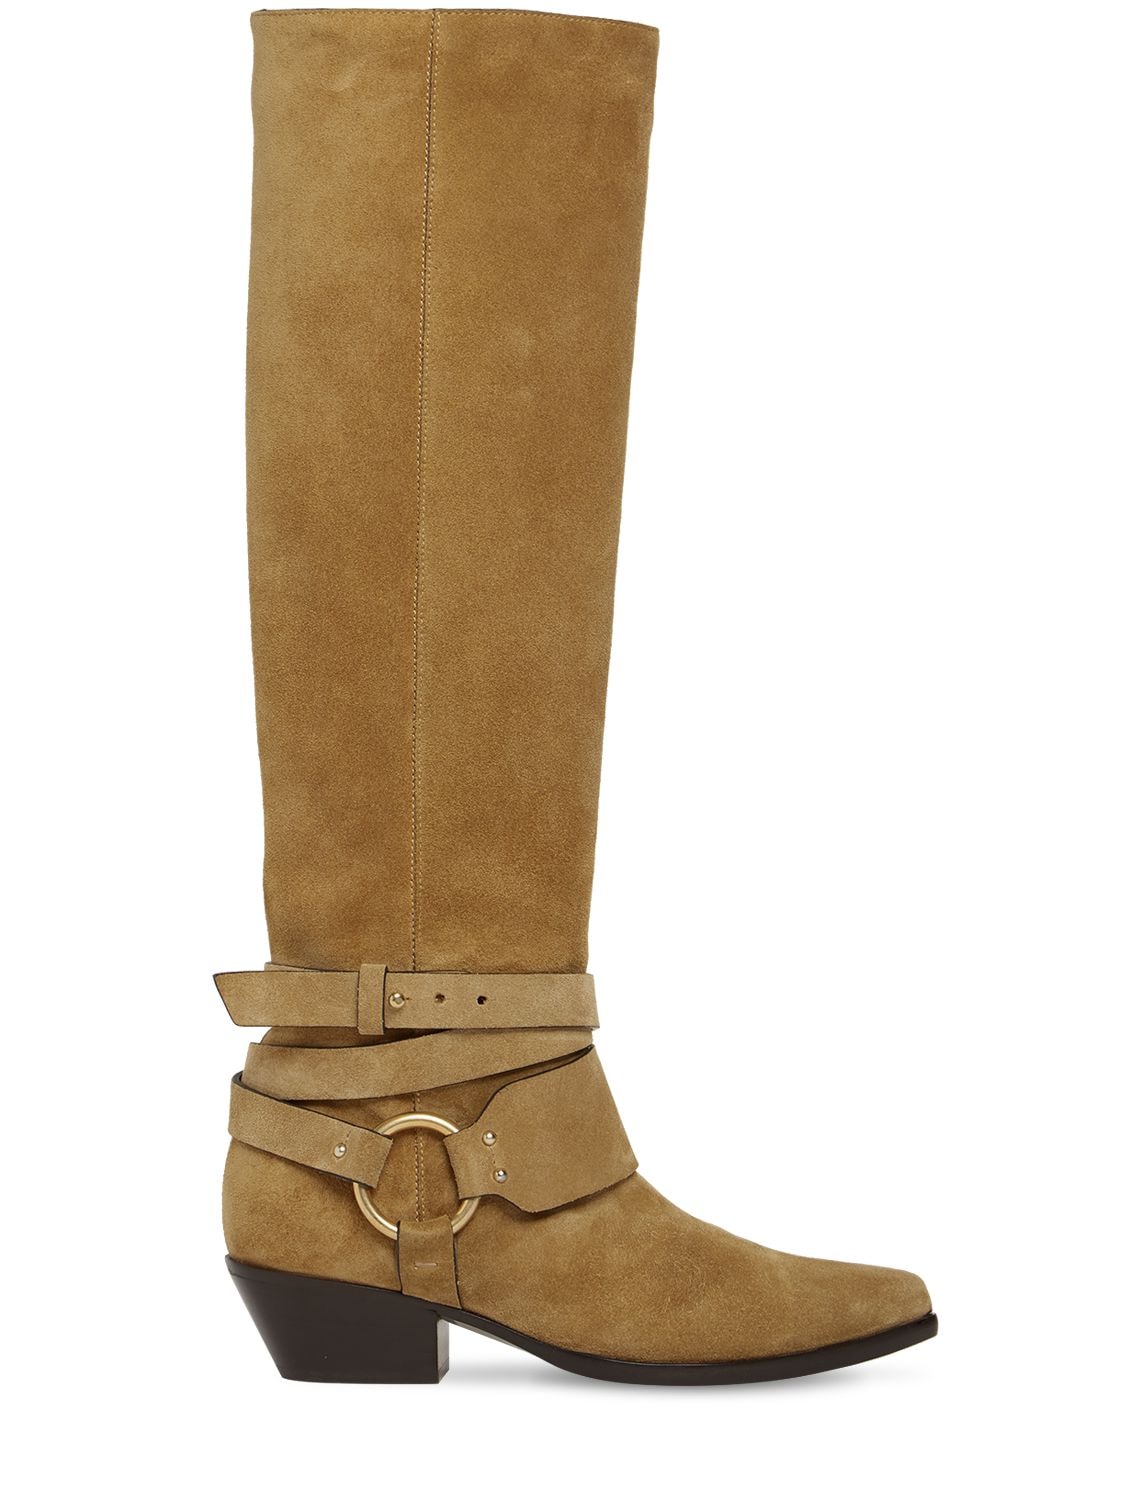 40mm Tall Suede Boots